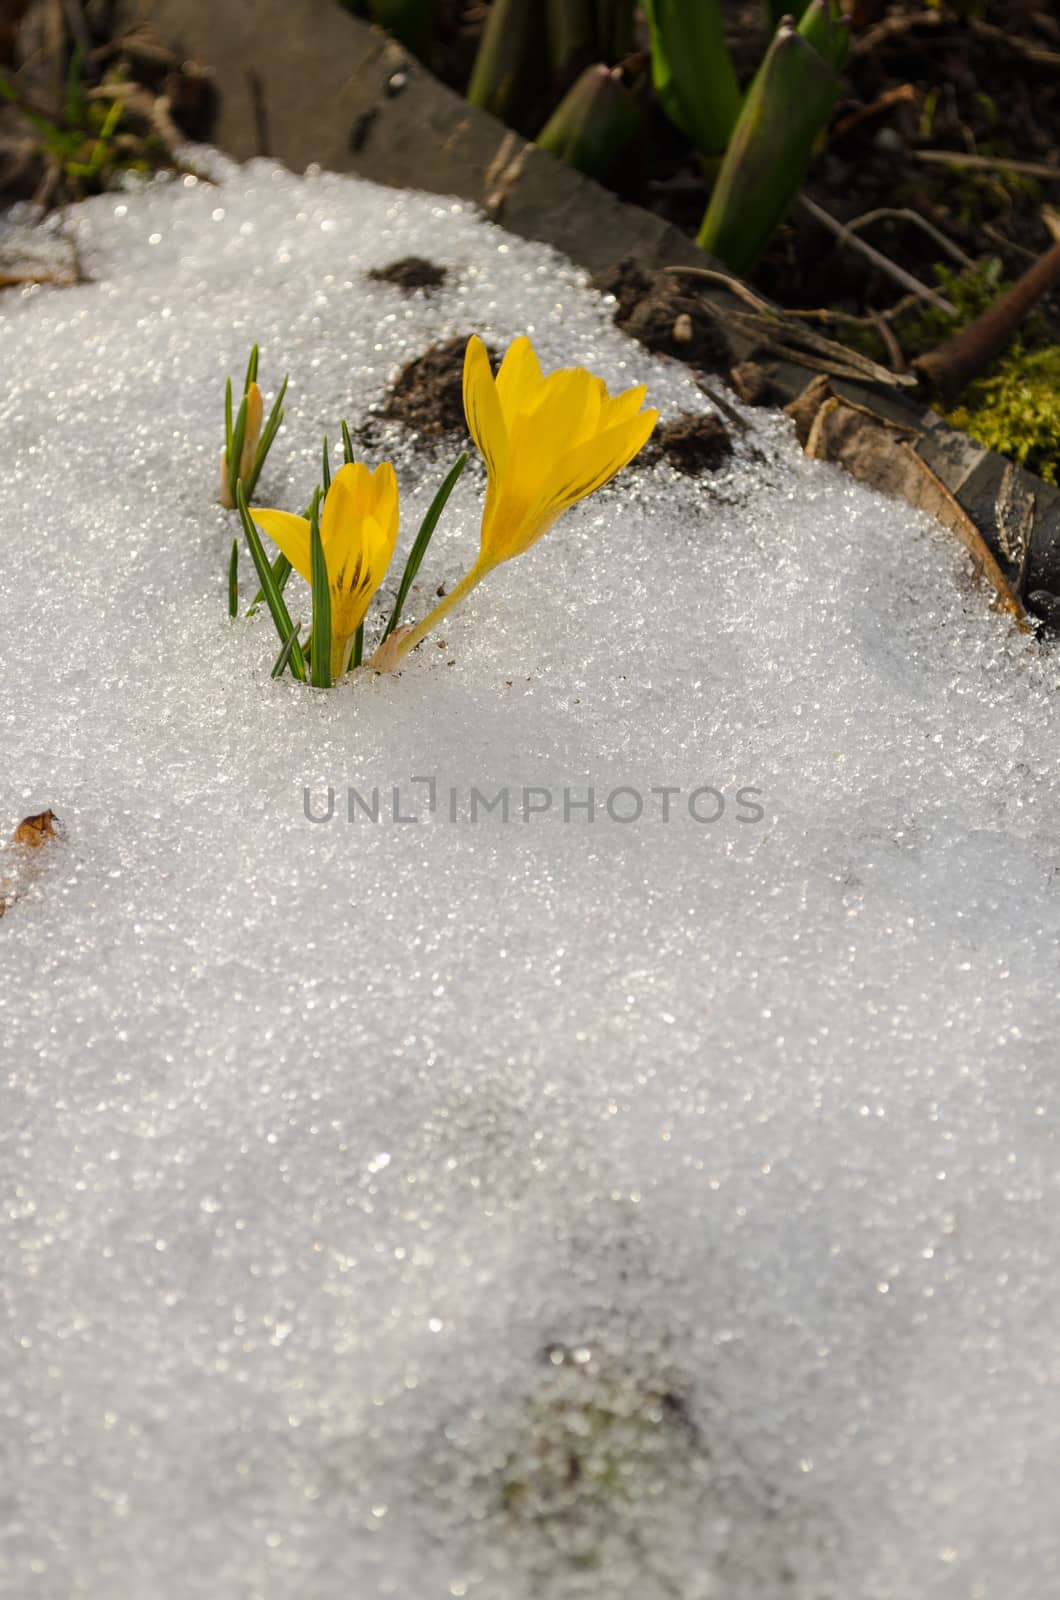 first bright spring crocus flowers erupted from the white snow